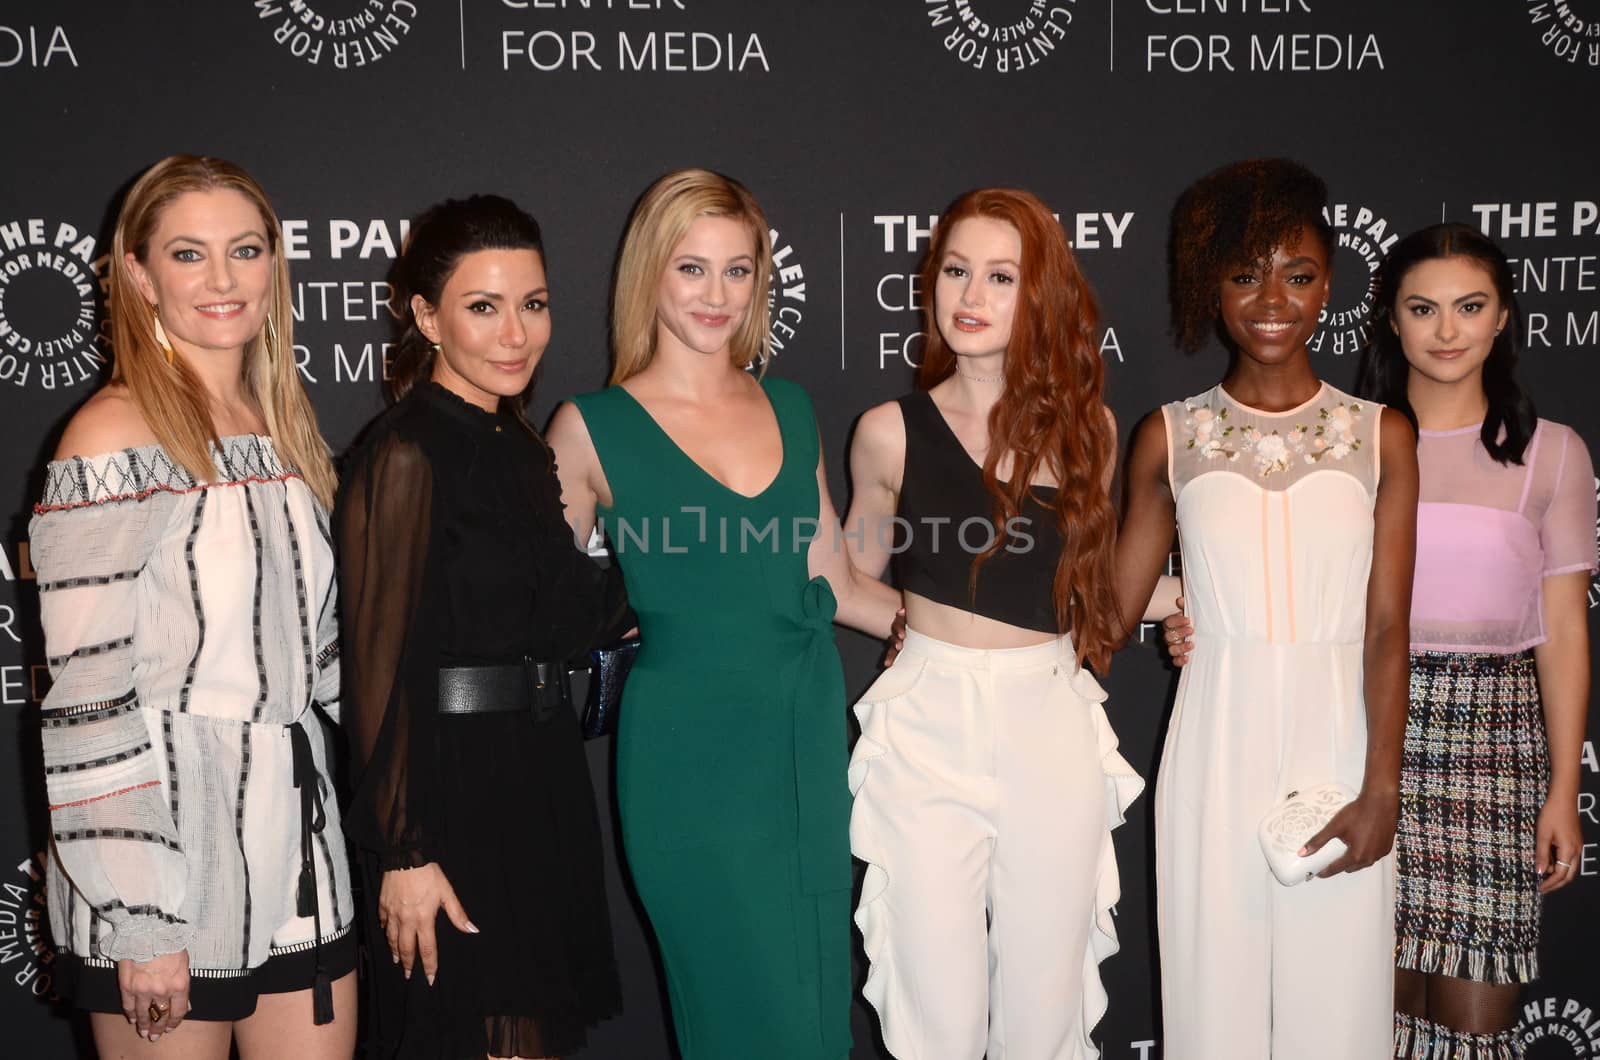 Madchen Amick, Marisol Nichols, Lili Reinhart, Madelaine Petsch, Ashleigh Murray, Camila Mendes at "Riverdale" Screening and Conversation presentted by the Paley Center for Media, Beverly Hills, CA 04-27-17/ImageCollect by ImageCollect